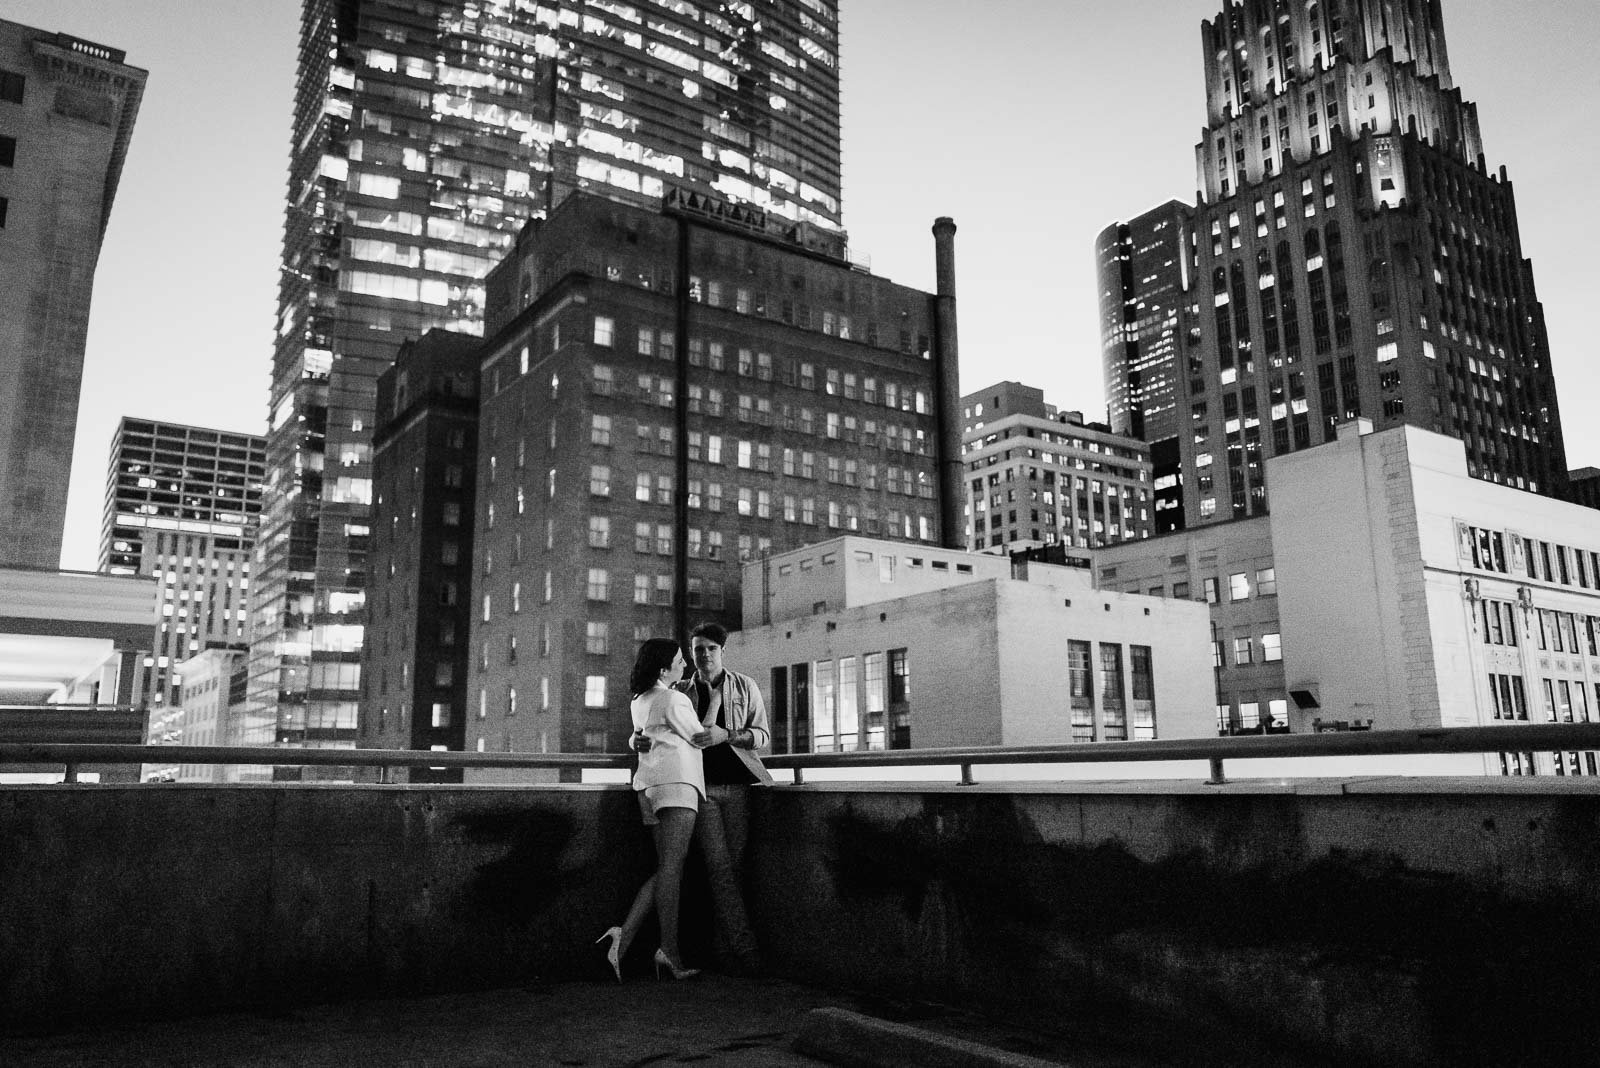 Saks garage overlooks downtown Houston and a cool little spot for an engaged couple for pics of the skyline at dusk and that 1950s gritty look